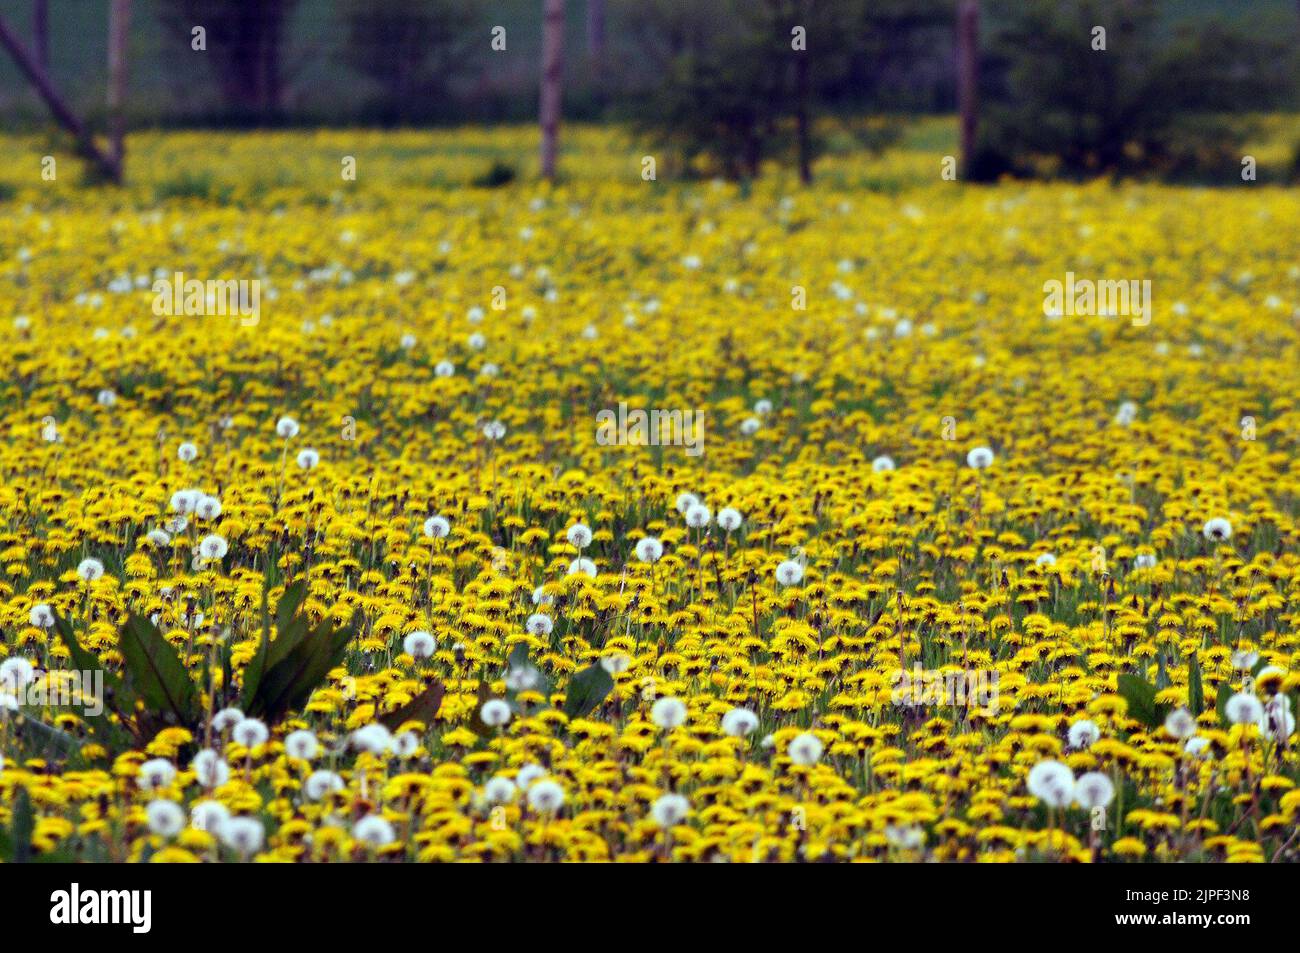 WARM SPRING TEMPERATURES AND LONG SPELLS OF SUNSHINE ARE CAUSING DANDELIONS AND DAISIES TO BLOOM IN HUGE NUMBERS ACROSS HAMPSHIRE A YELLOW CARPET OF DANDELIONS IN A FIELD AT HAMBLEDON  PIC MIKE WALKER, MIKE WALKER PICTURES, 125 THE KEEP, PORTCHESTER, HANTS PO16 9PR TEL. 07747012287 e.mail. walker.mike@ntlworld.com Stock Photo